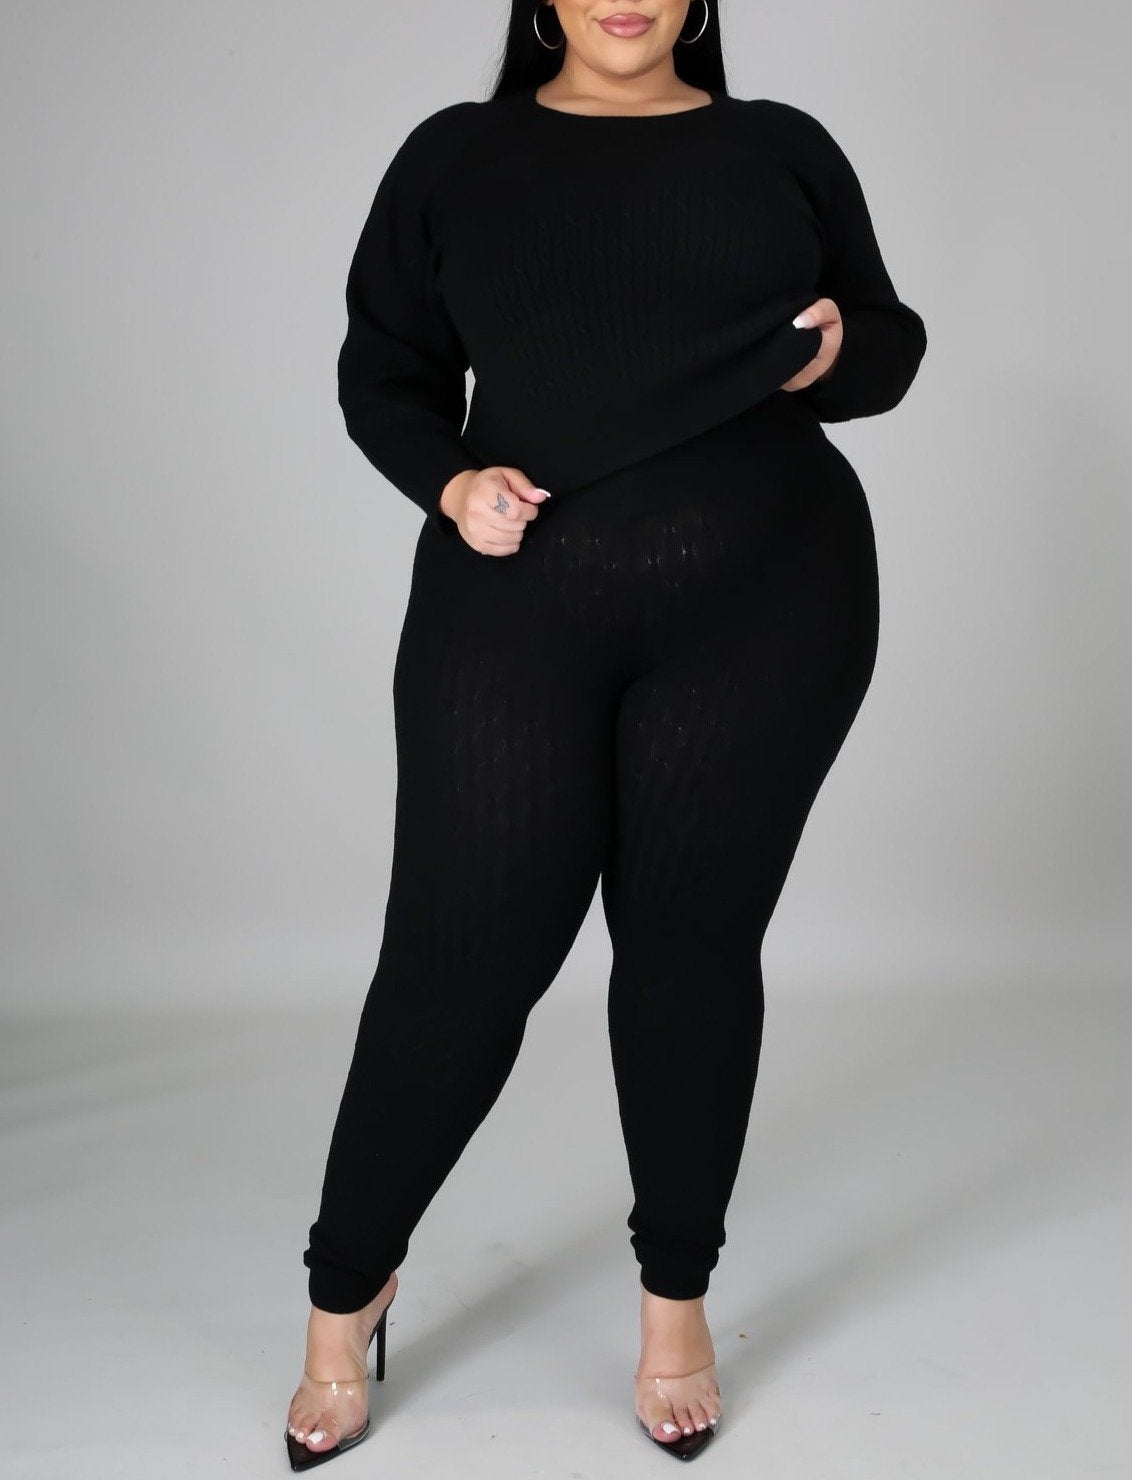 Black Sweater (plus size) - DLNI Hair and